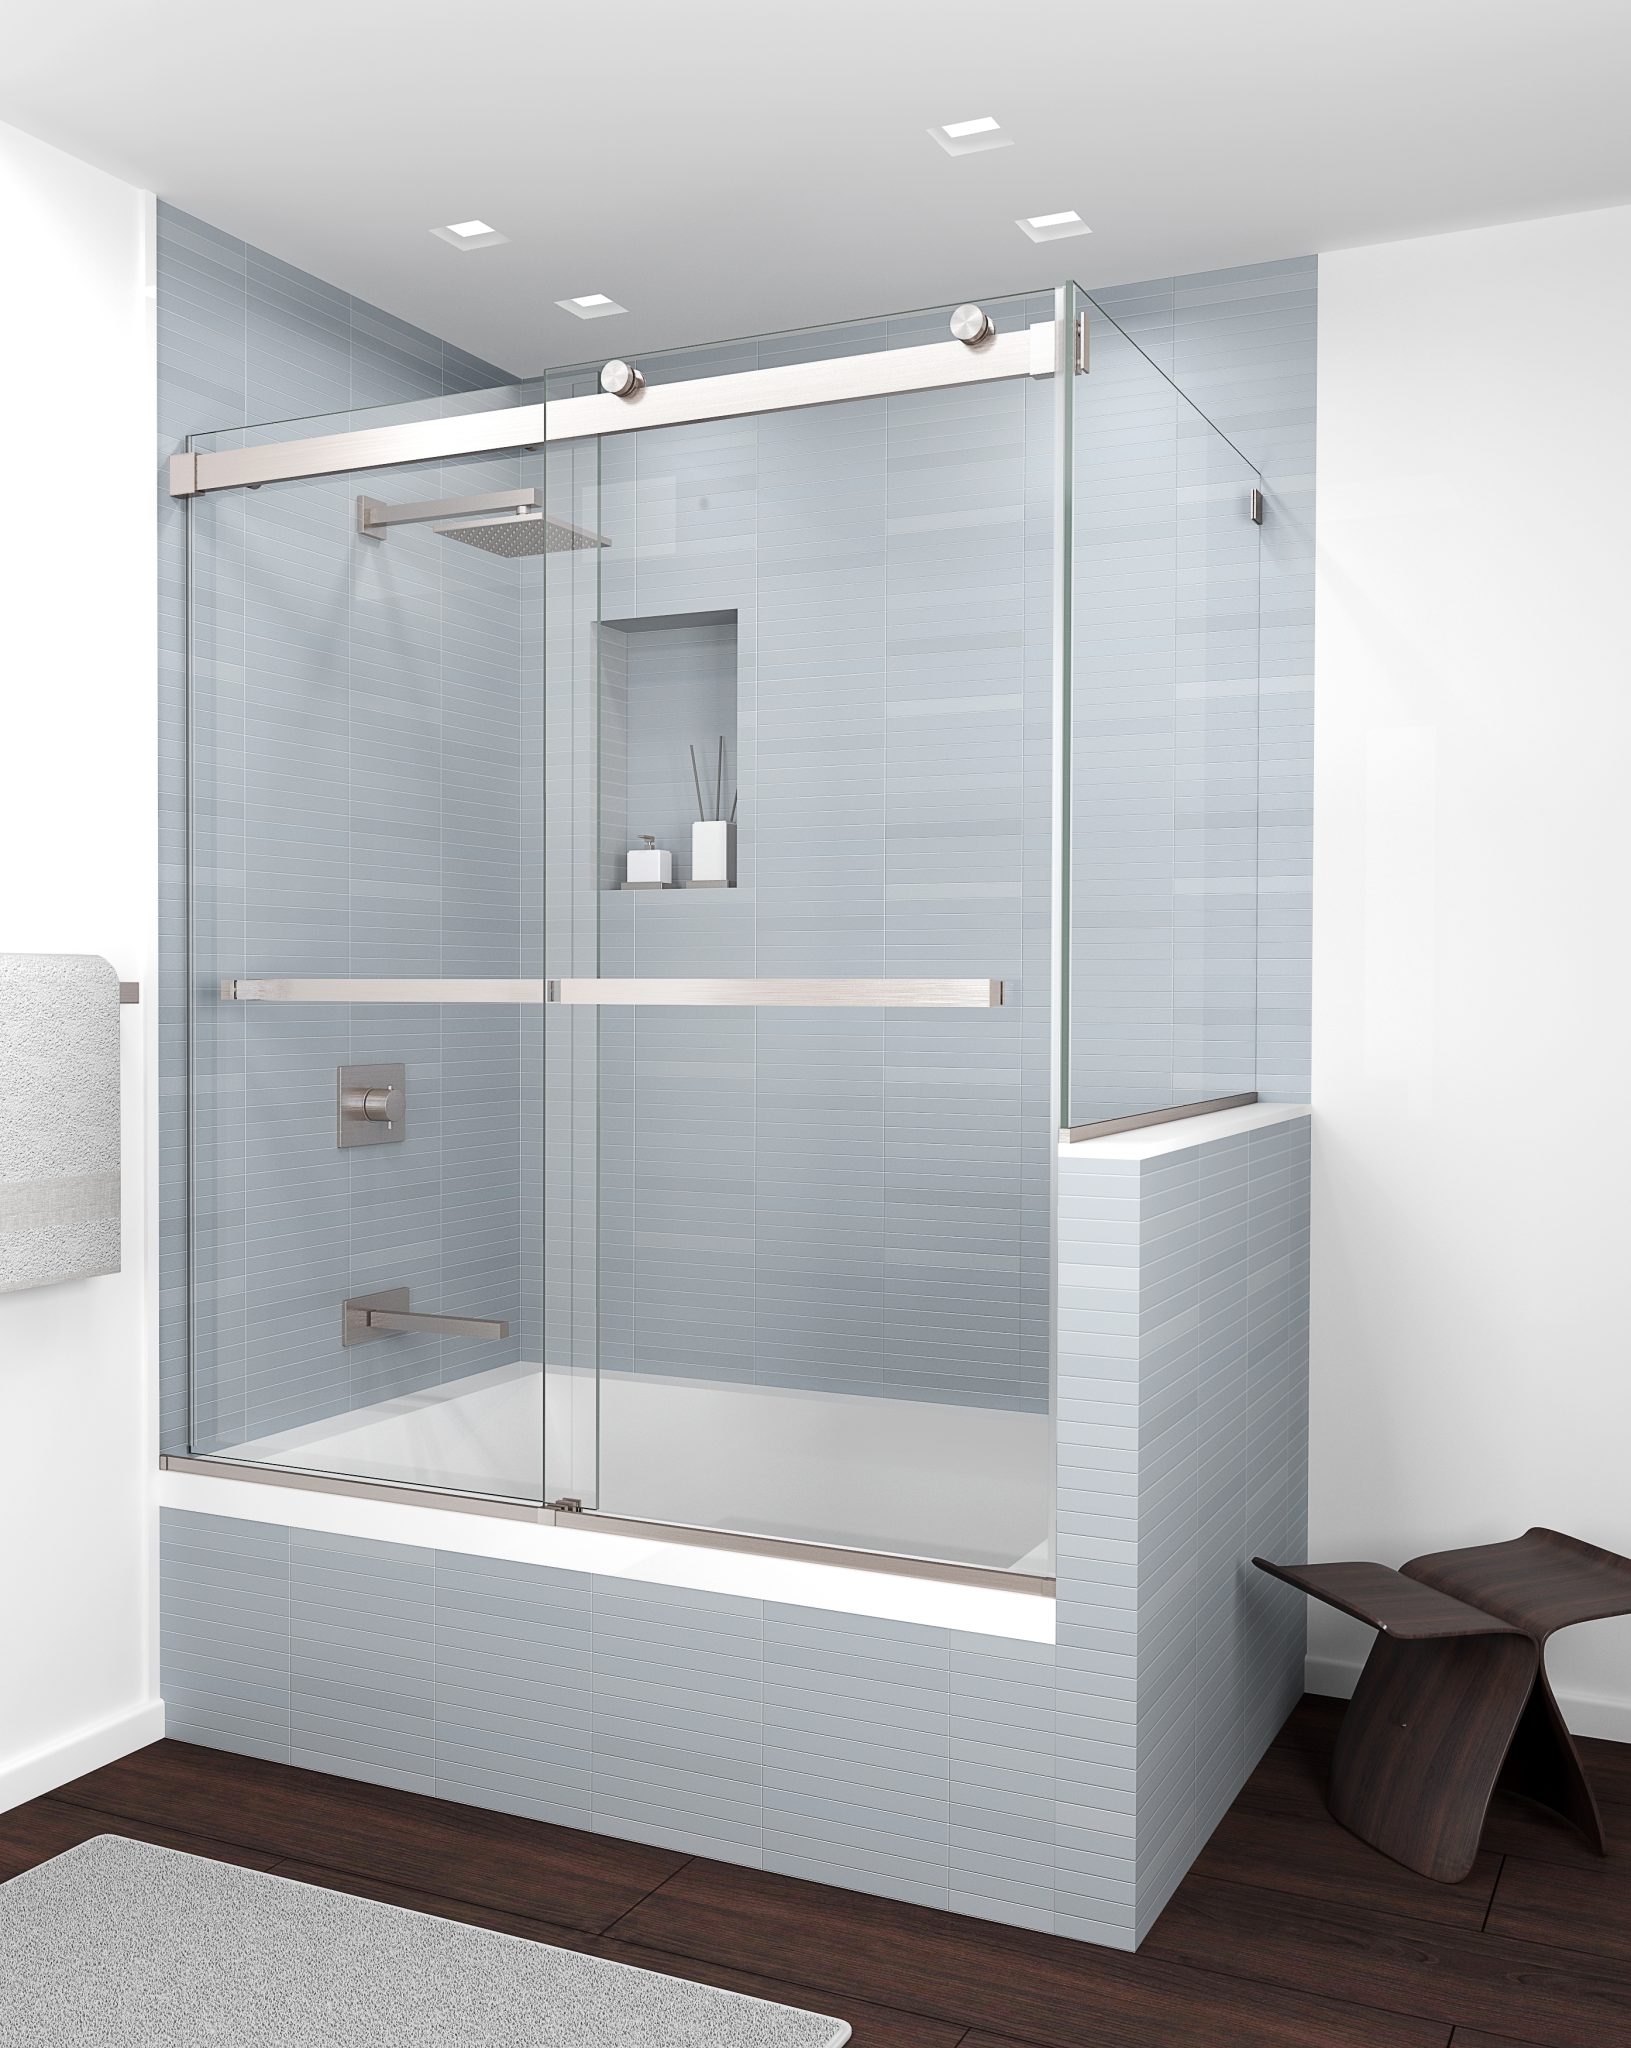 The Equalis Series Shower Doors Glasscrafters